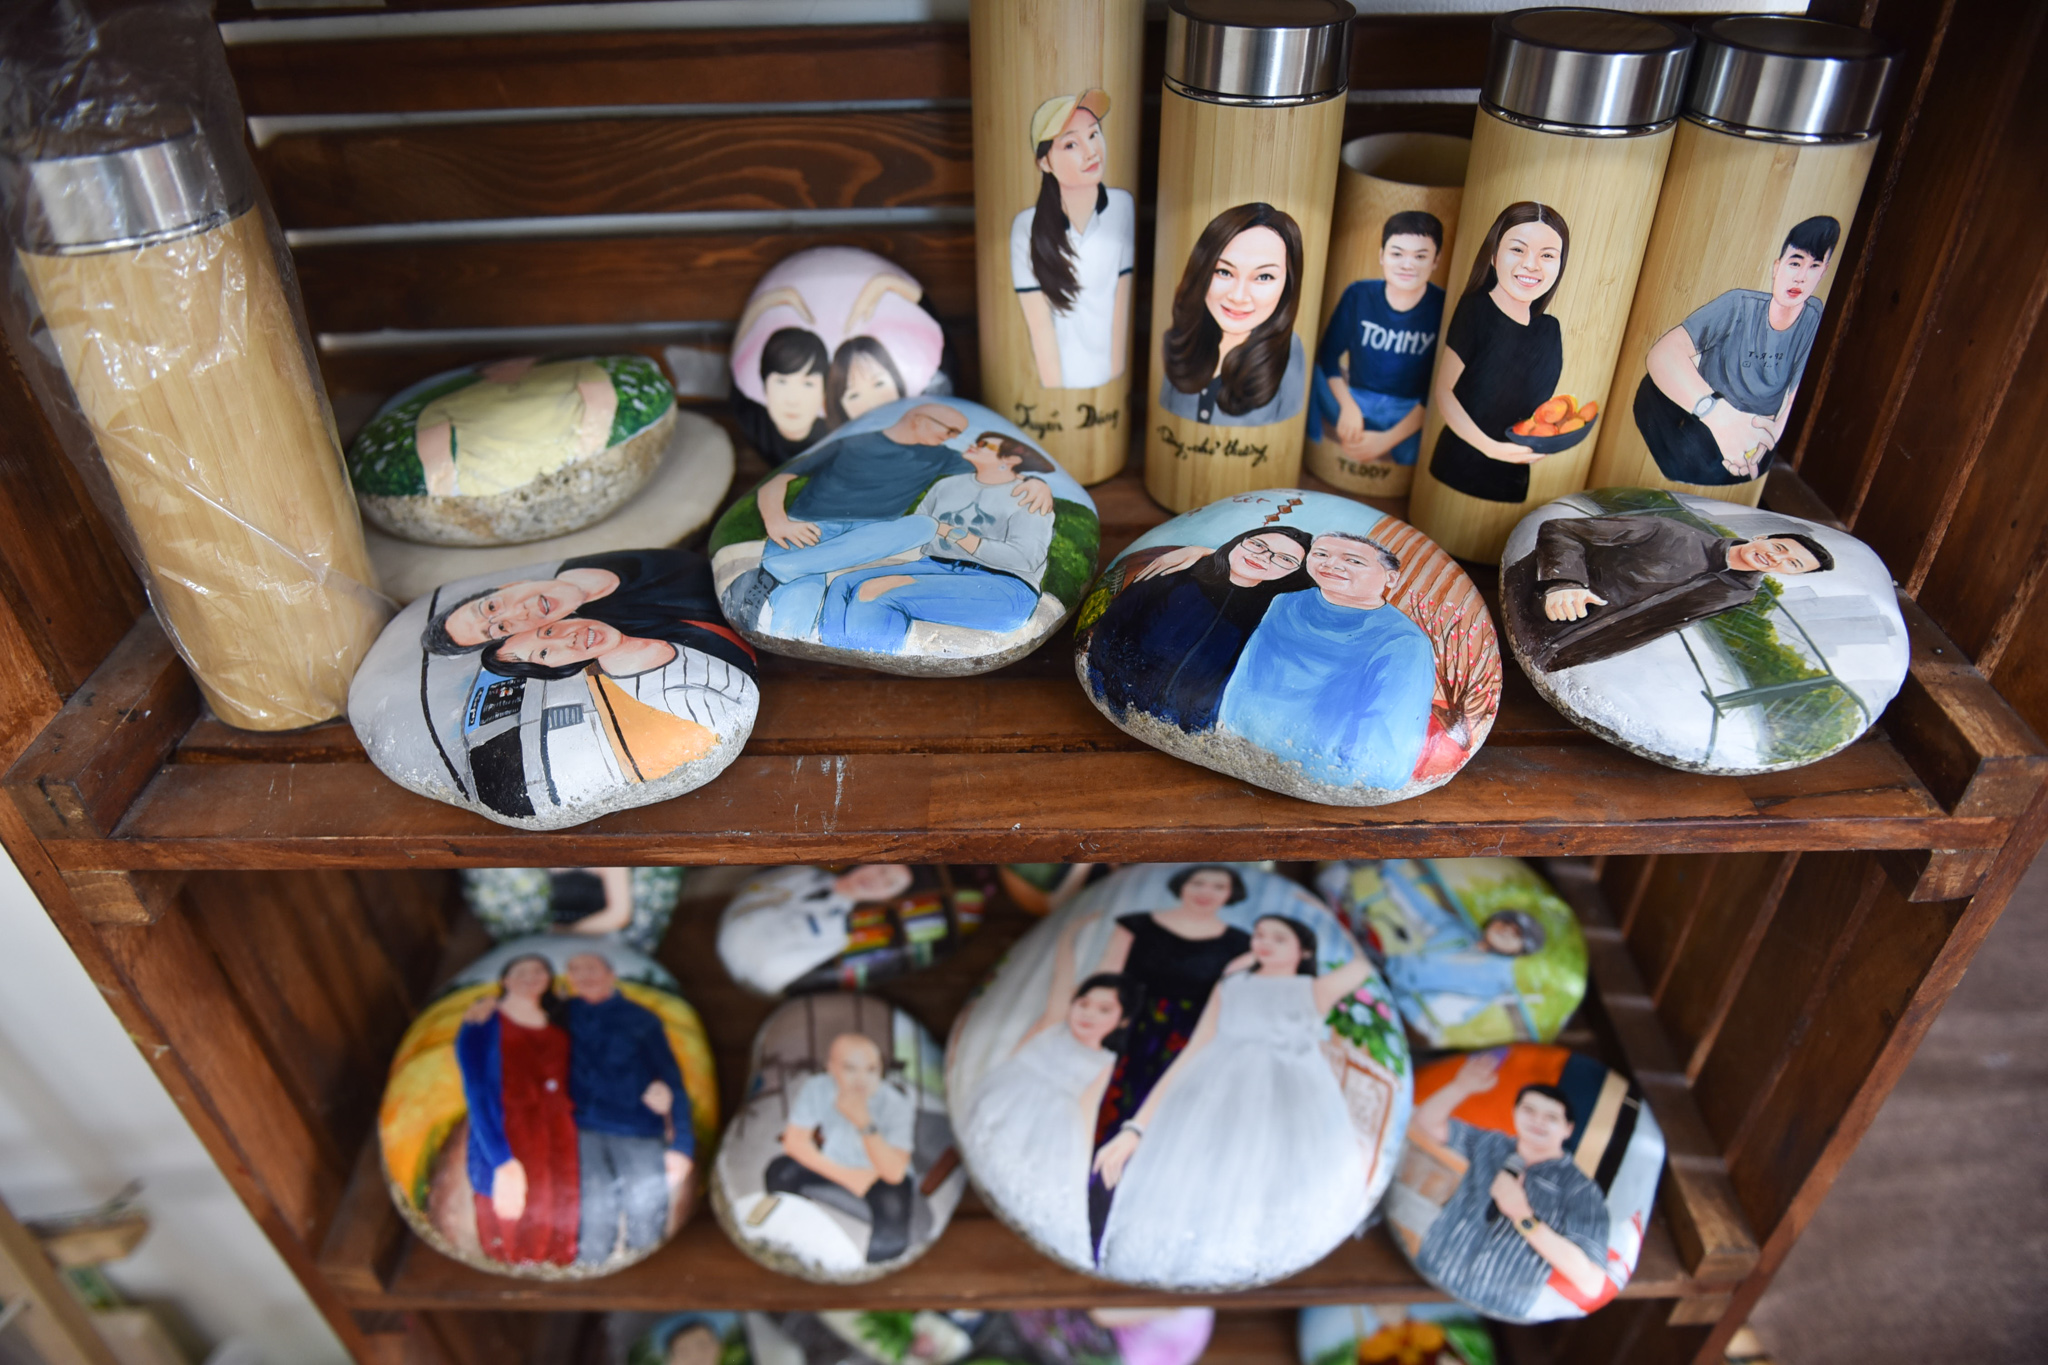 Paintings on pebbles and bamboo thermos are seen at Sỏi Nghệ Thuật - G.Art at Thao Dien Ward, Thu Duc City Ho Chi Minh City. Photo: Ngoc Phuong / Tuoi Tre